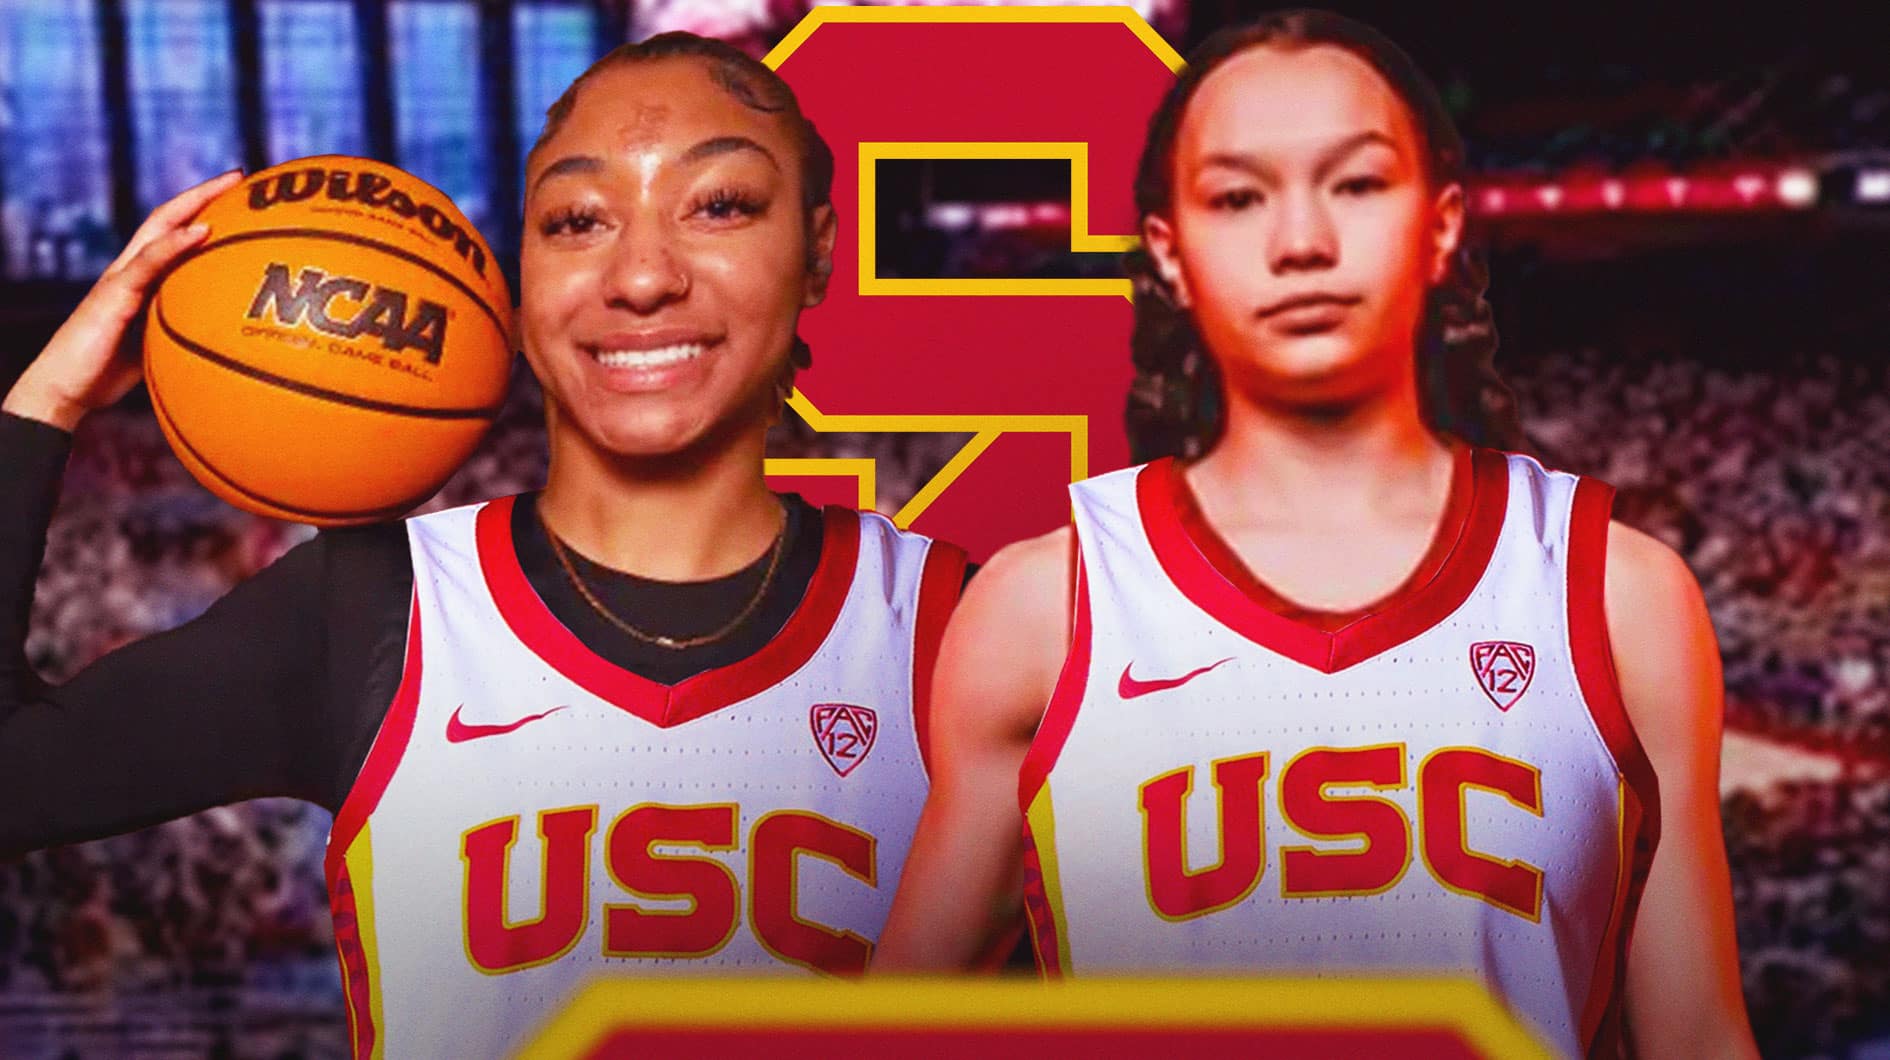 USC adds two 5stars in Class of 2024 recruiting win